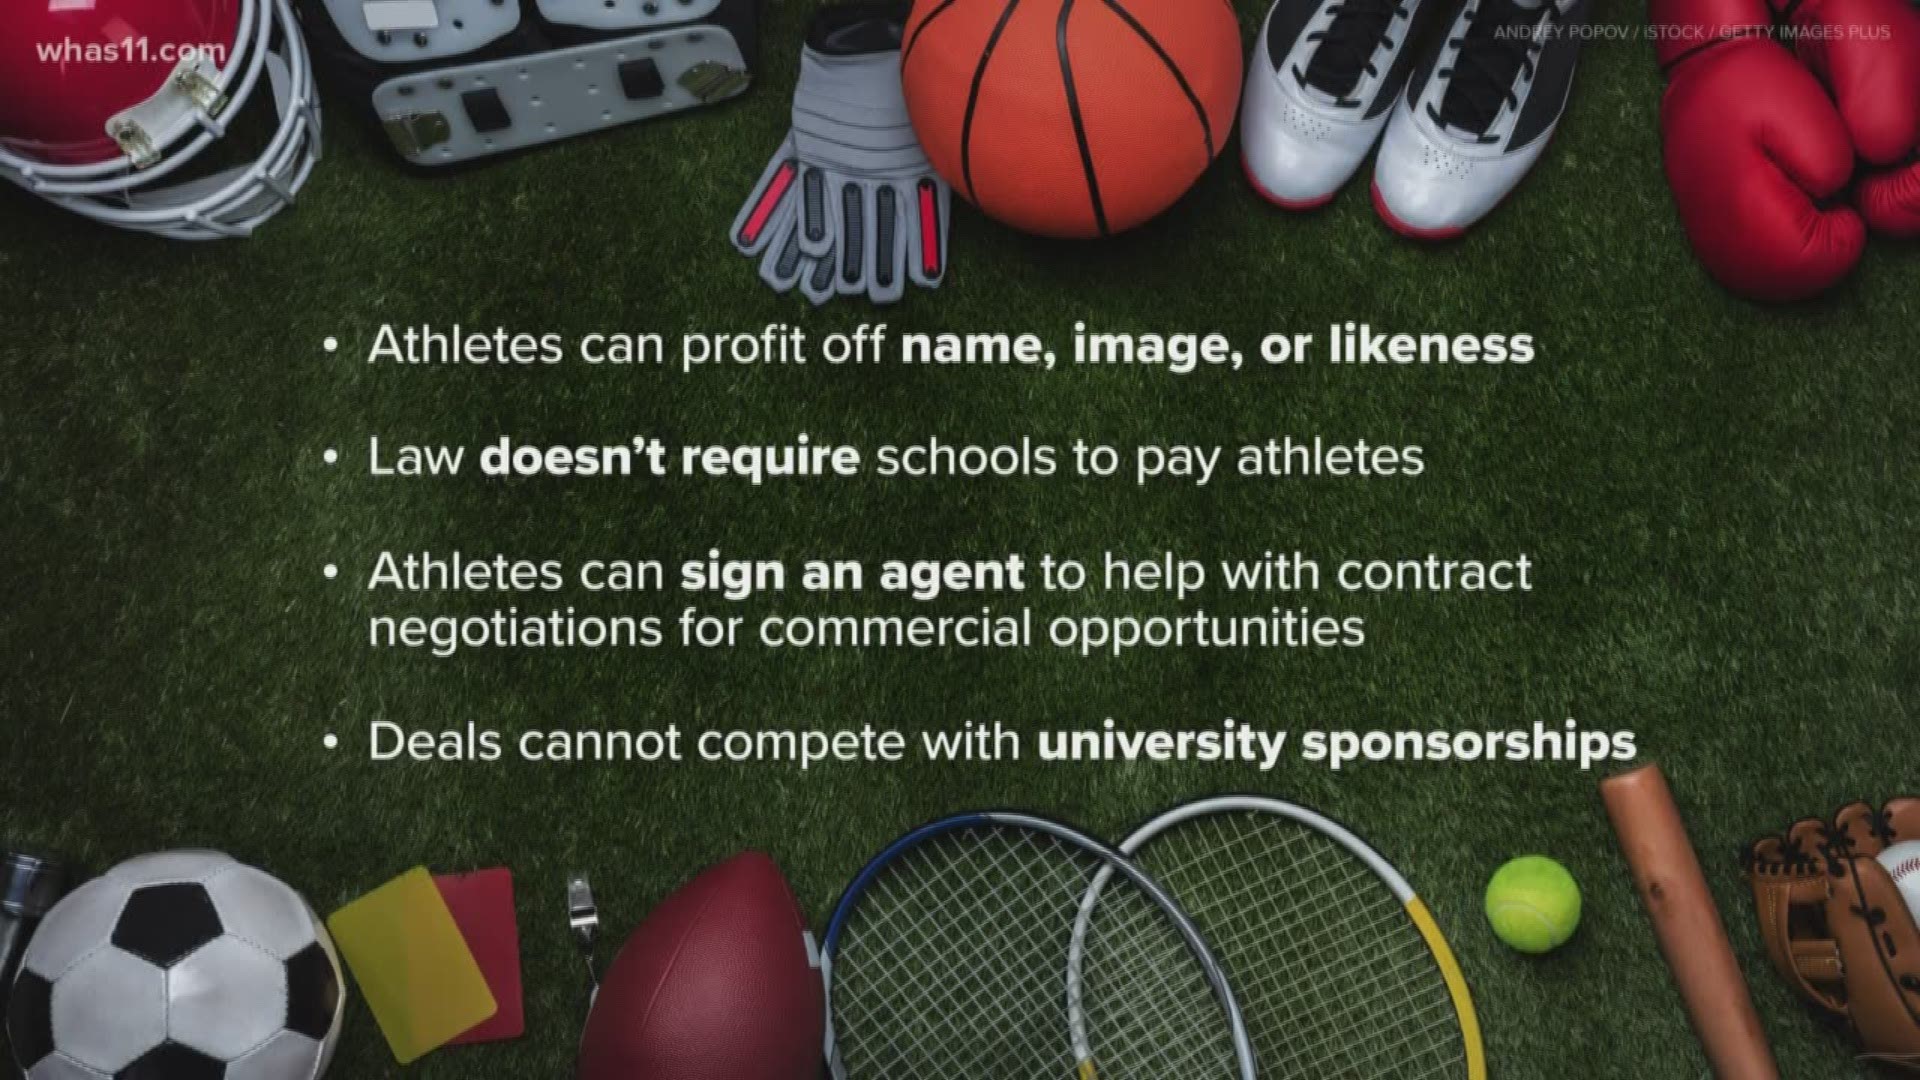 The state of California signed the Fair Pay to Play Act. The NCAA does not support this action at all.